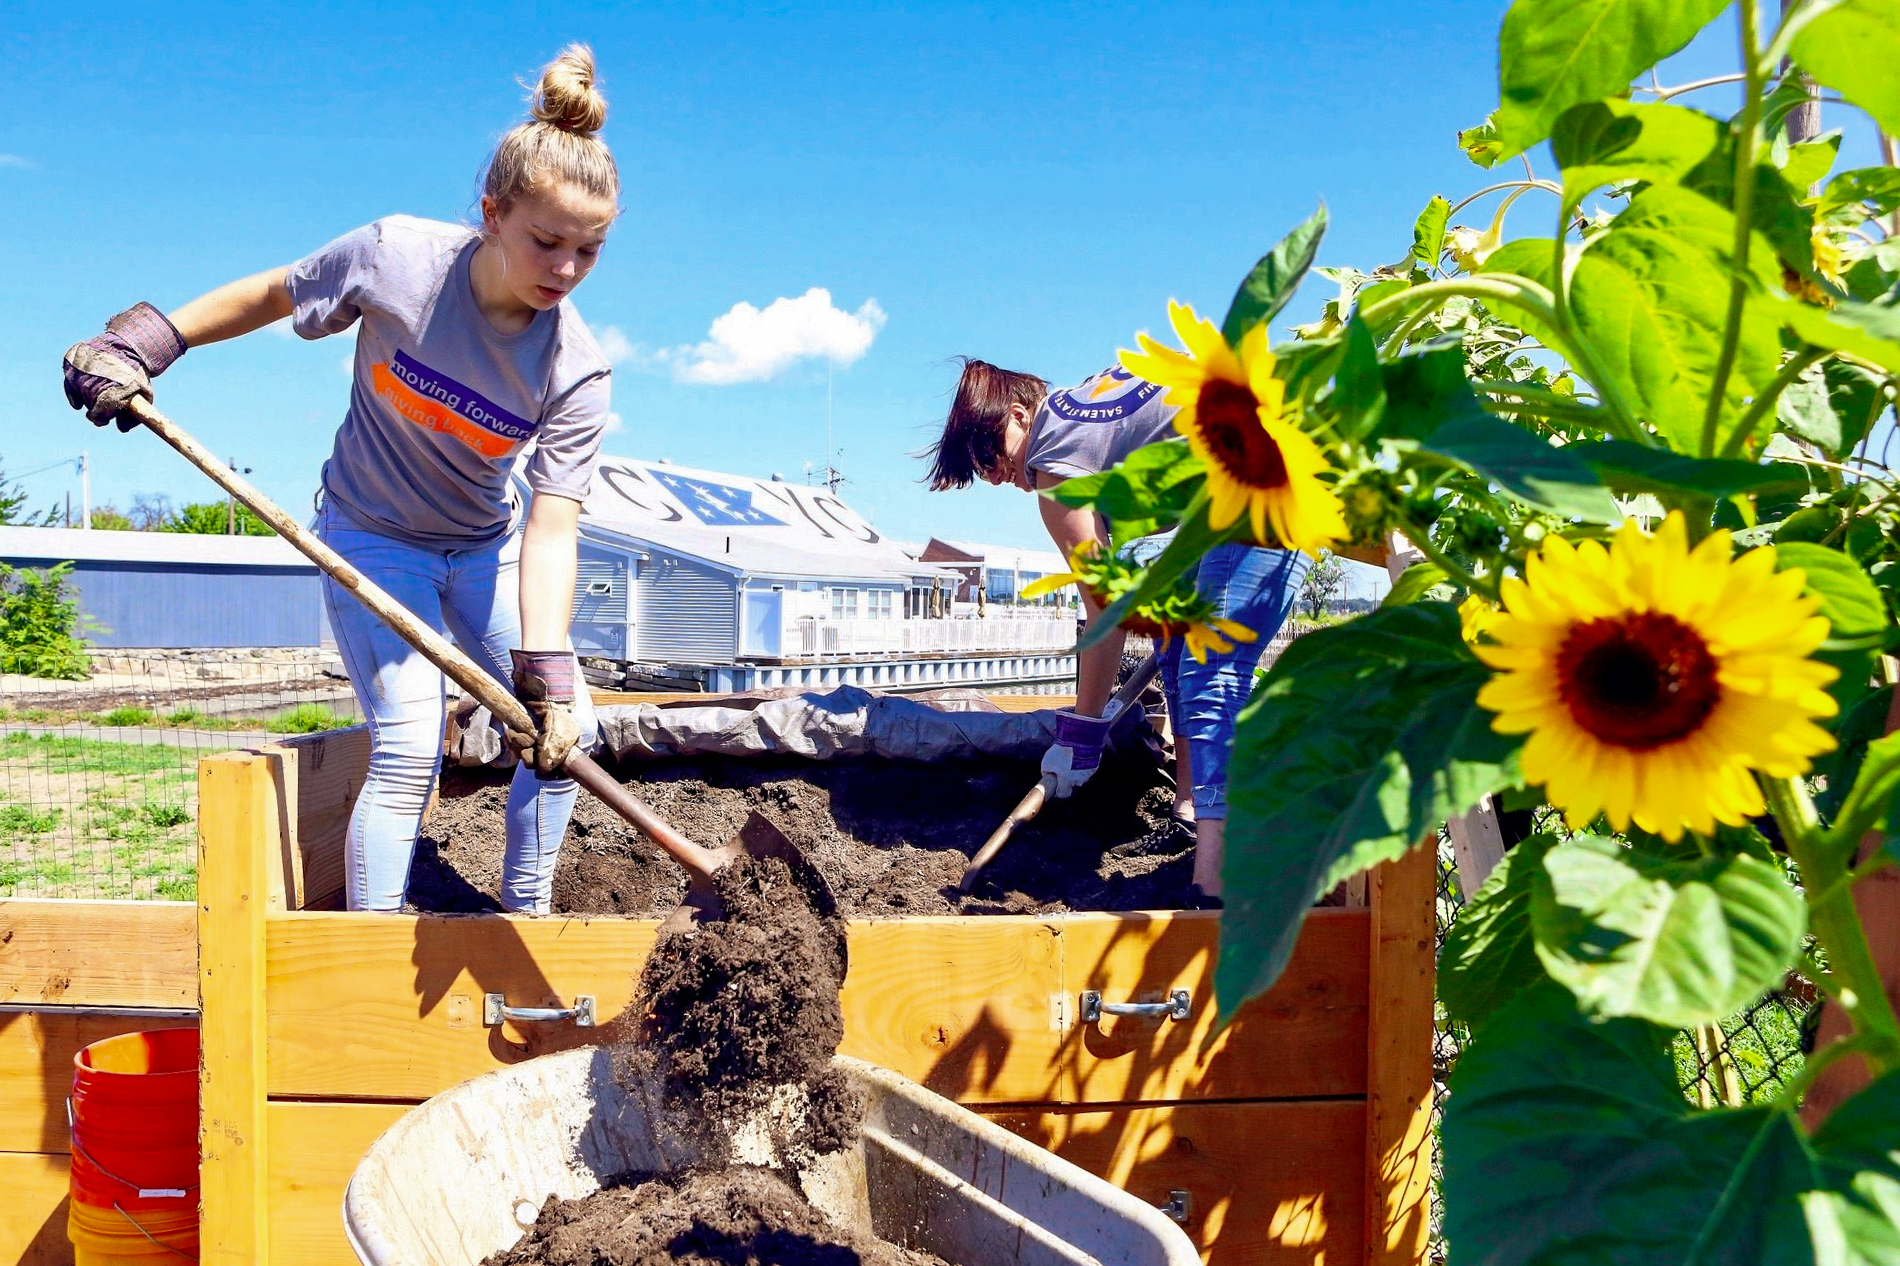 A Salem State student digs into soil with a shovel while volunteering.